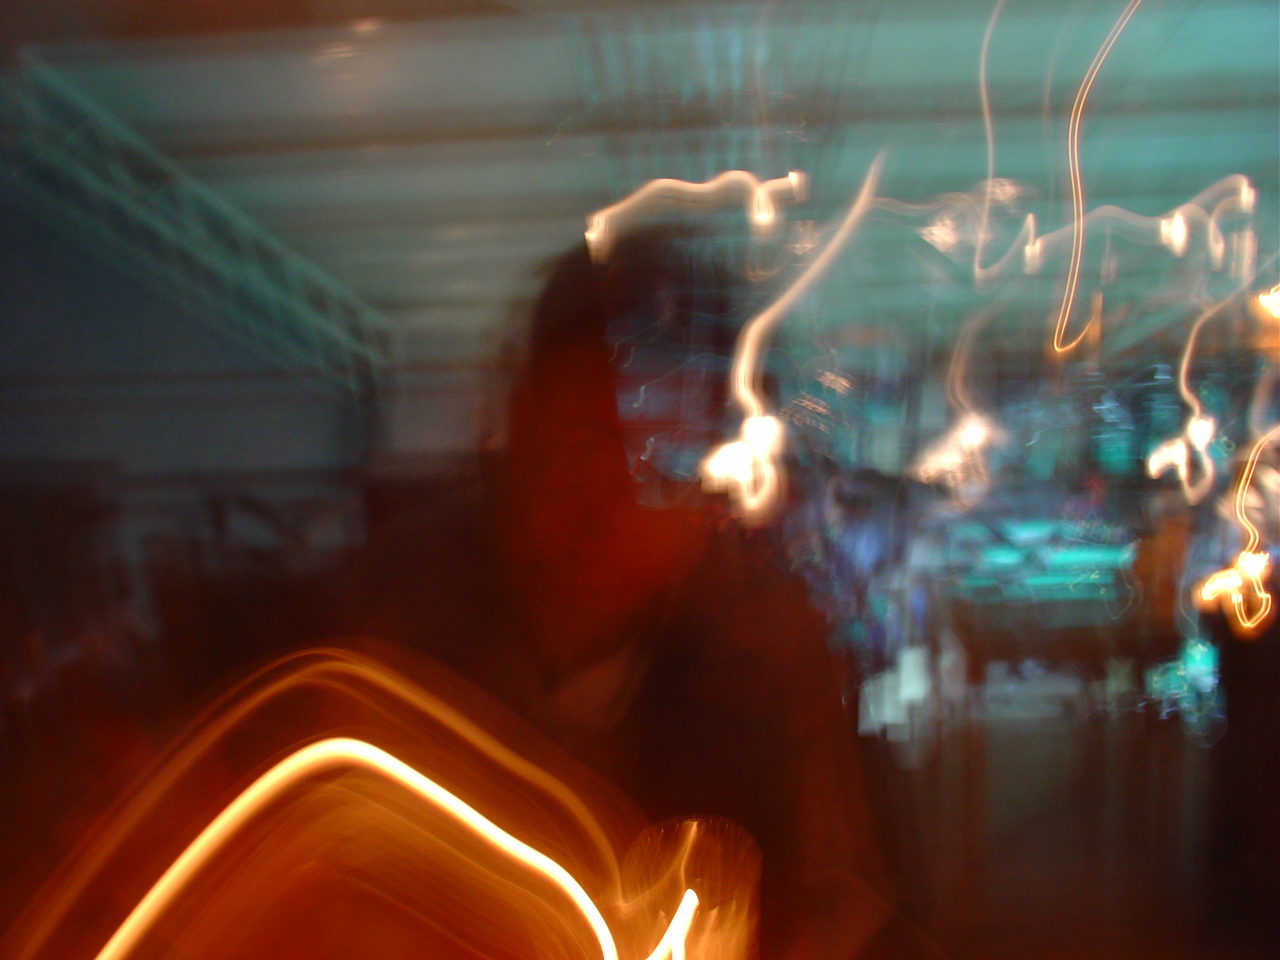 blurry image of someone walking past some lights